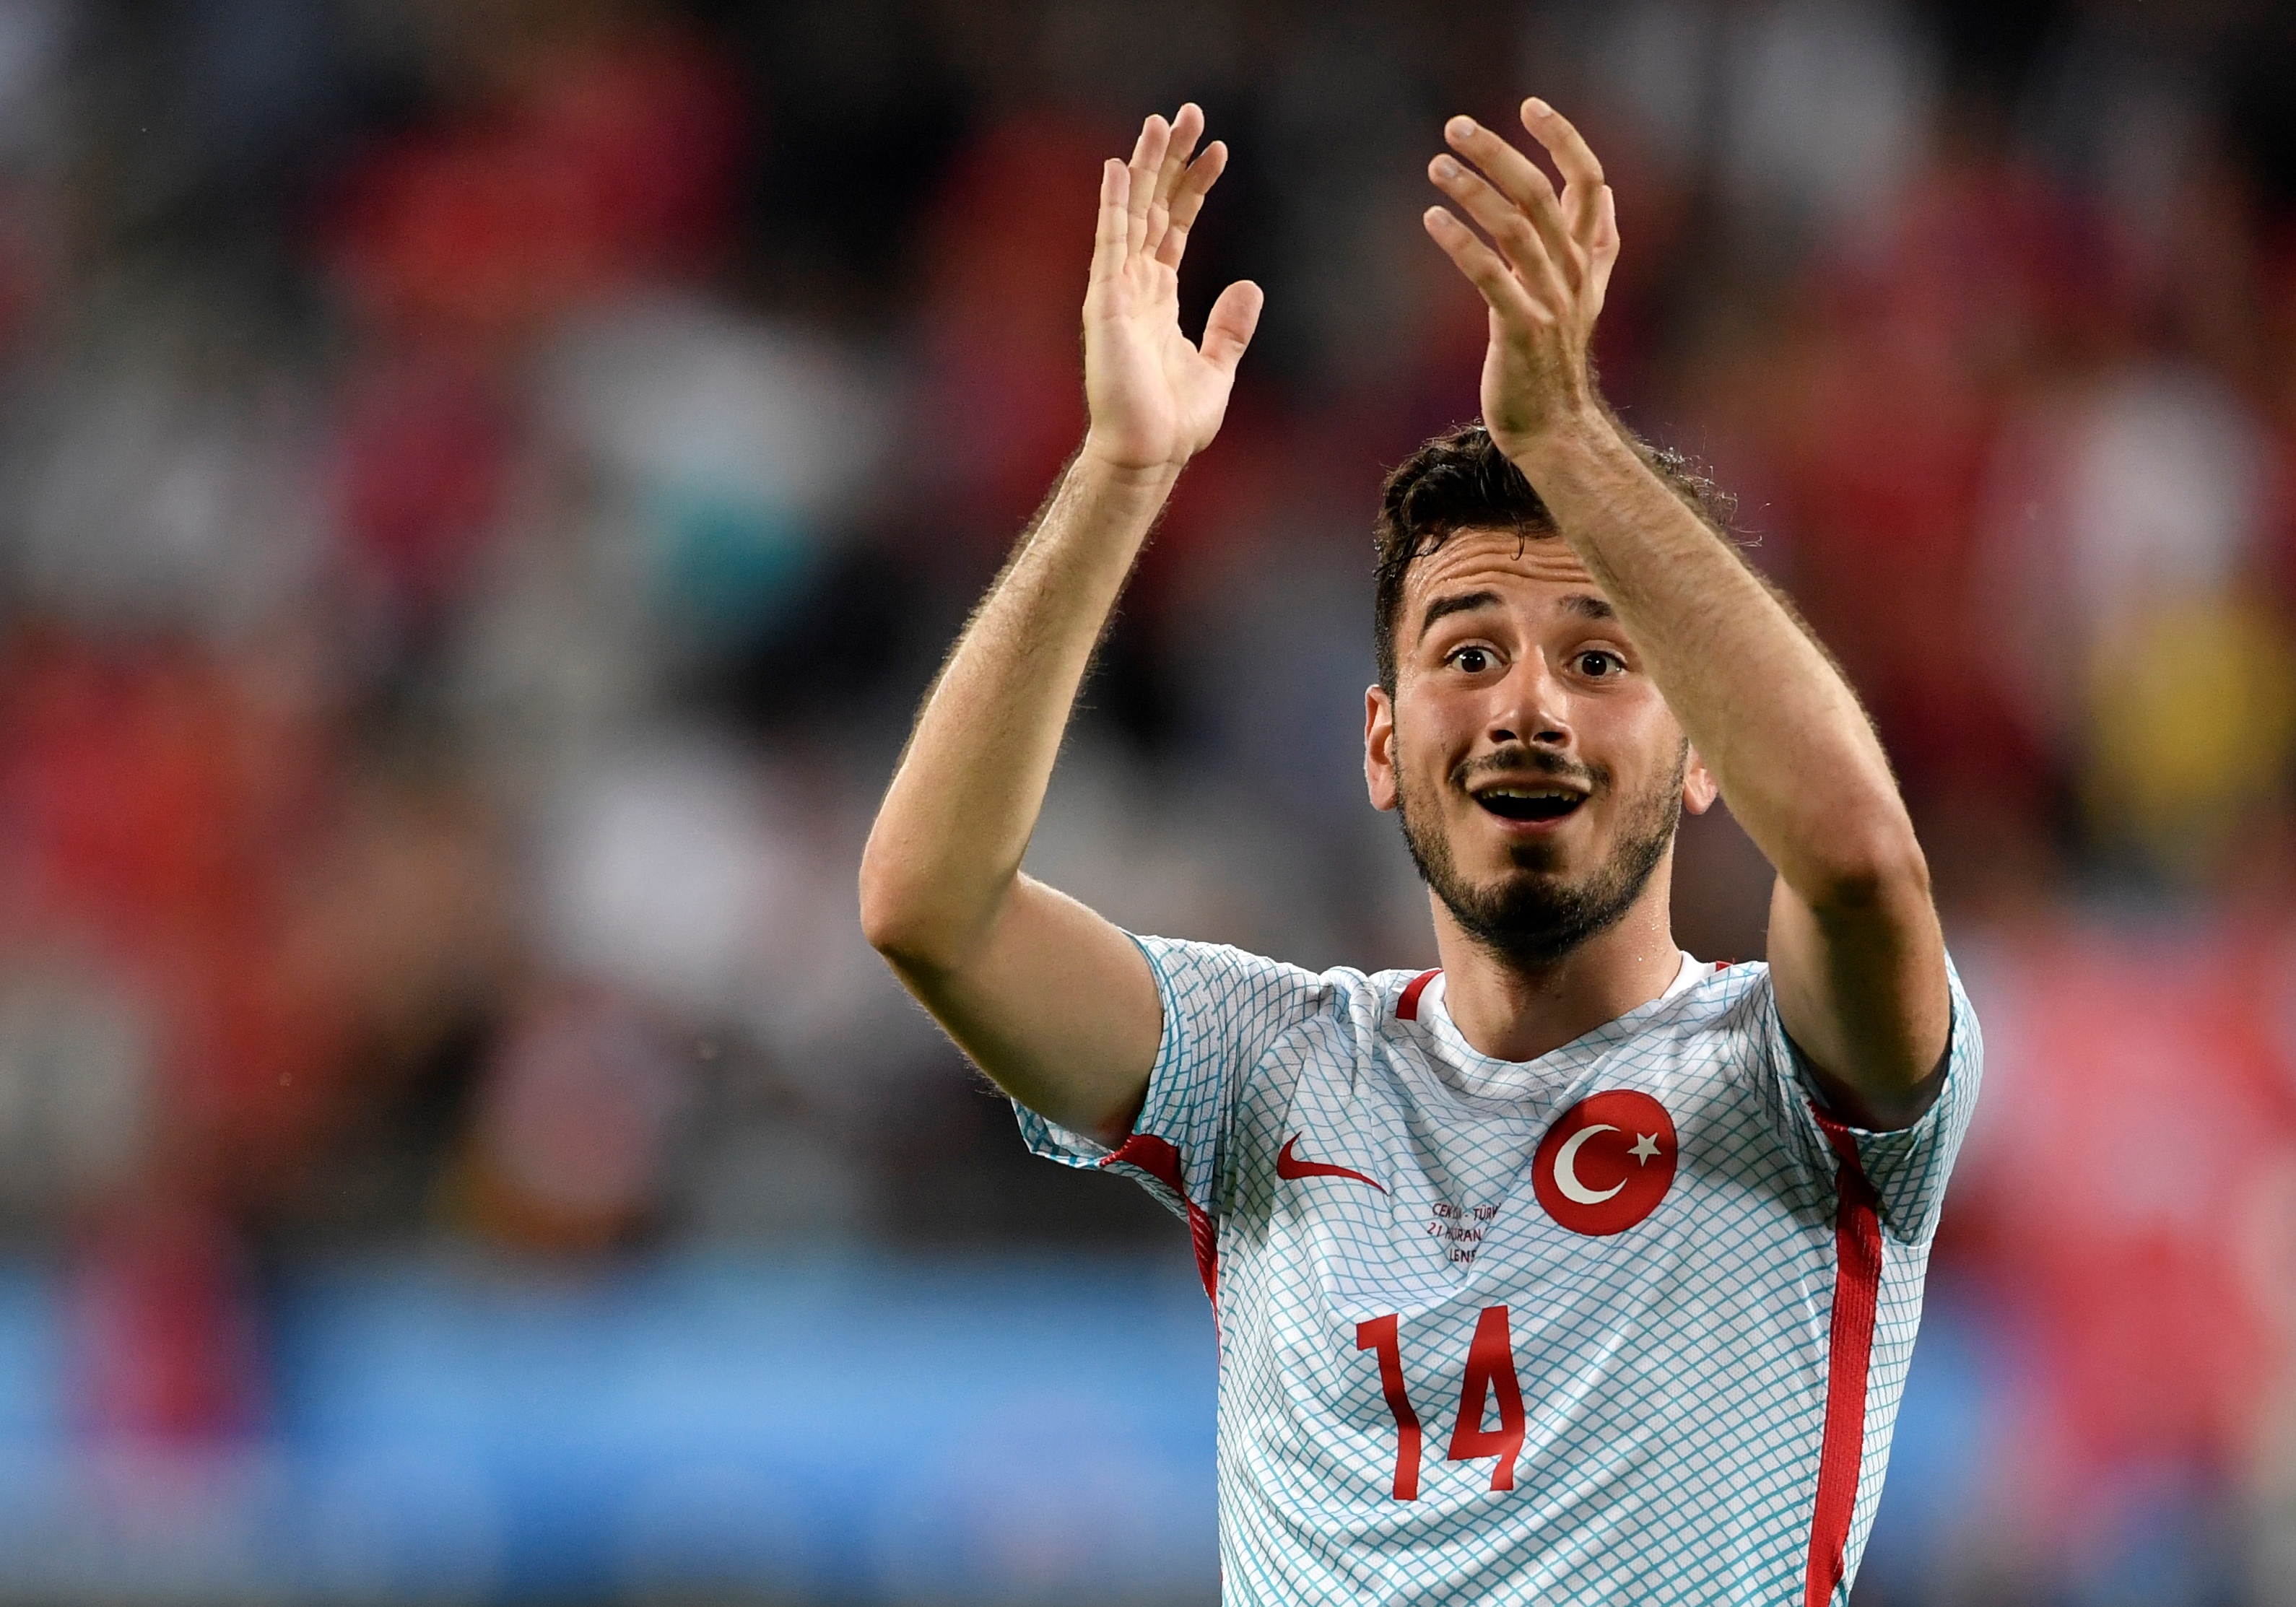 Turkey's midfielder Oguzhan Ozyakup celebrates his team's victory at the end of the Euro 2016 group D football match between Czech Republic and Turkey at Bollaert-Delelis stadium in Lens on June 21, 2016. / AFP / PHILIPPE LOPEZ        (Photo credit should read PHILIPPE LOPEZ/AFP/Getty Images)